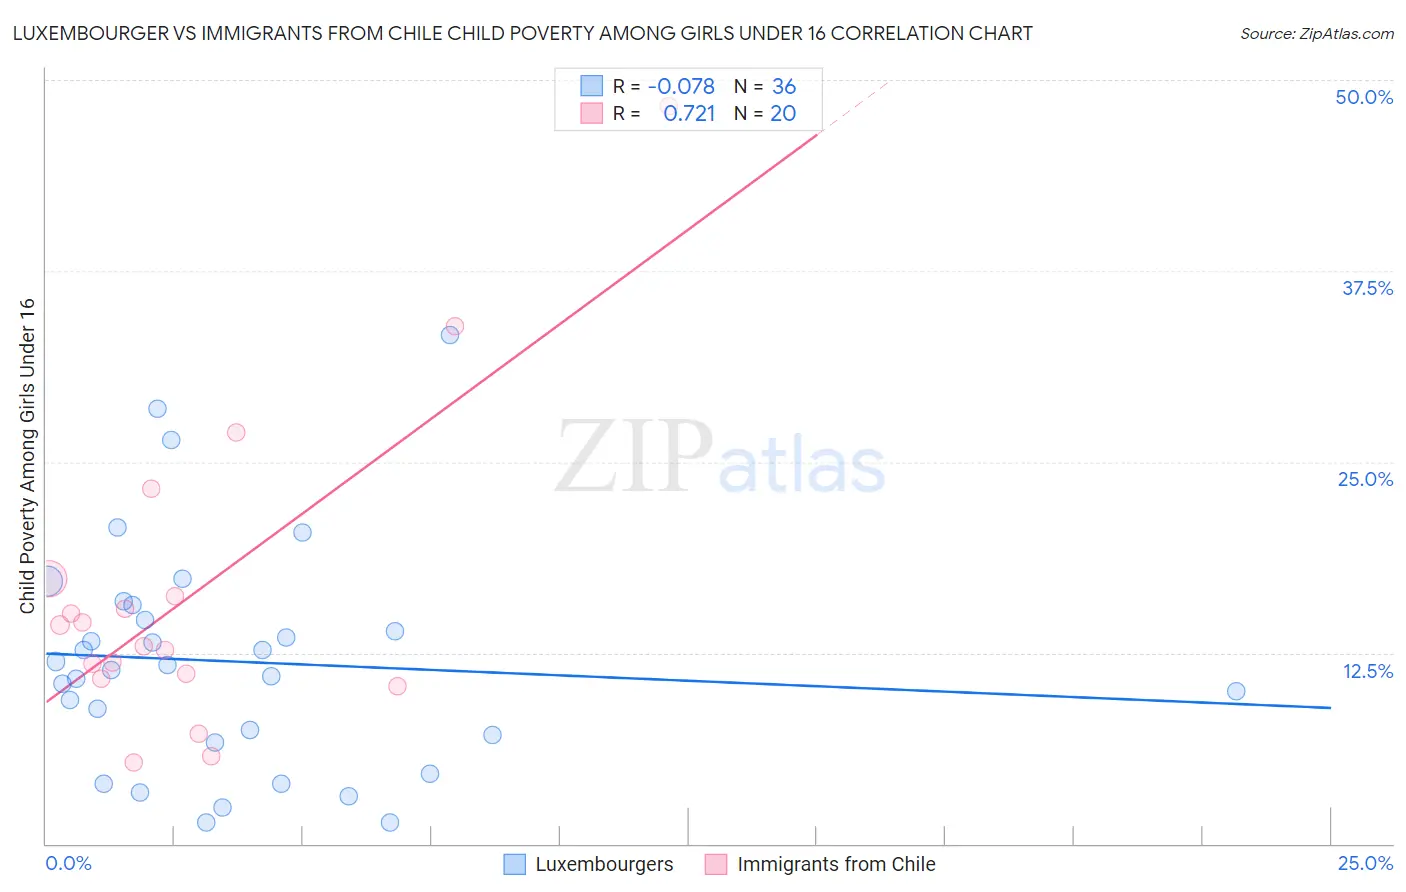 Luxembourger vs Immigrants from Chile Child Poverty Among Girls Under 16